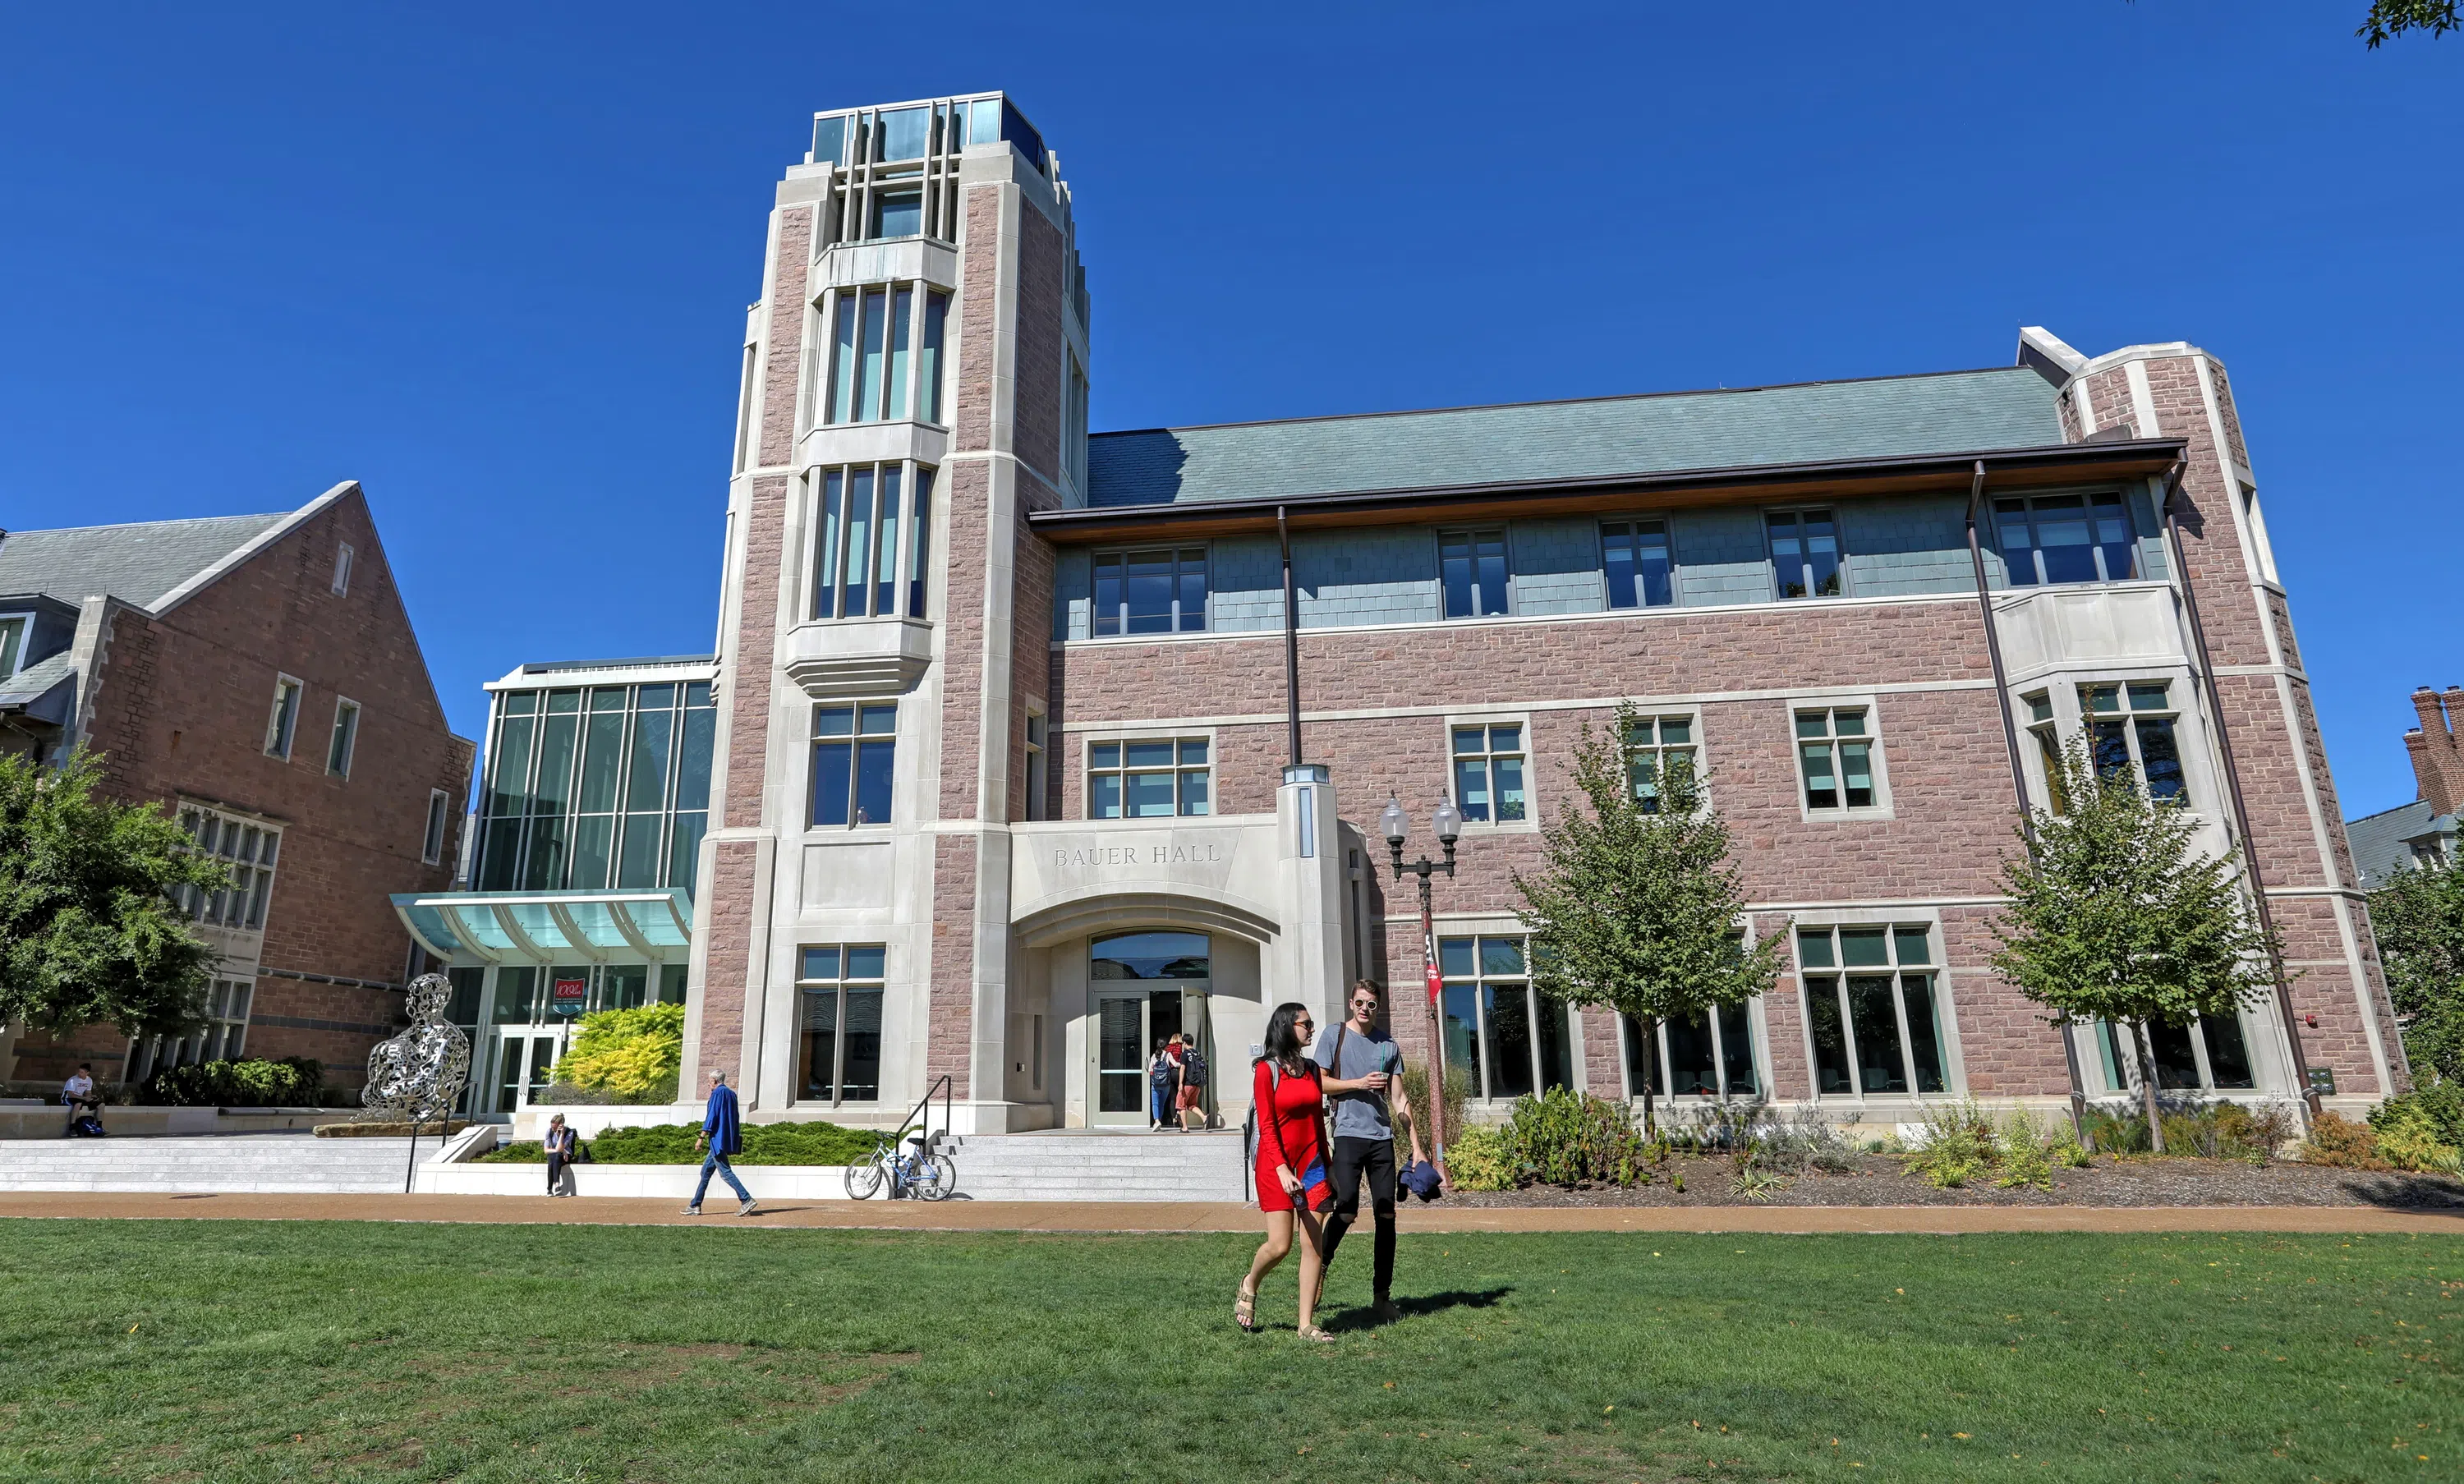 A photo of the Bauer Hall exterior